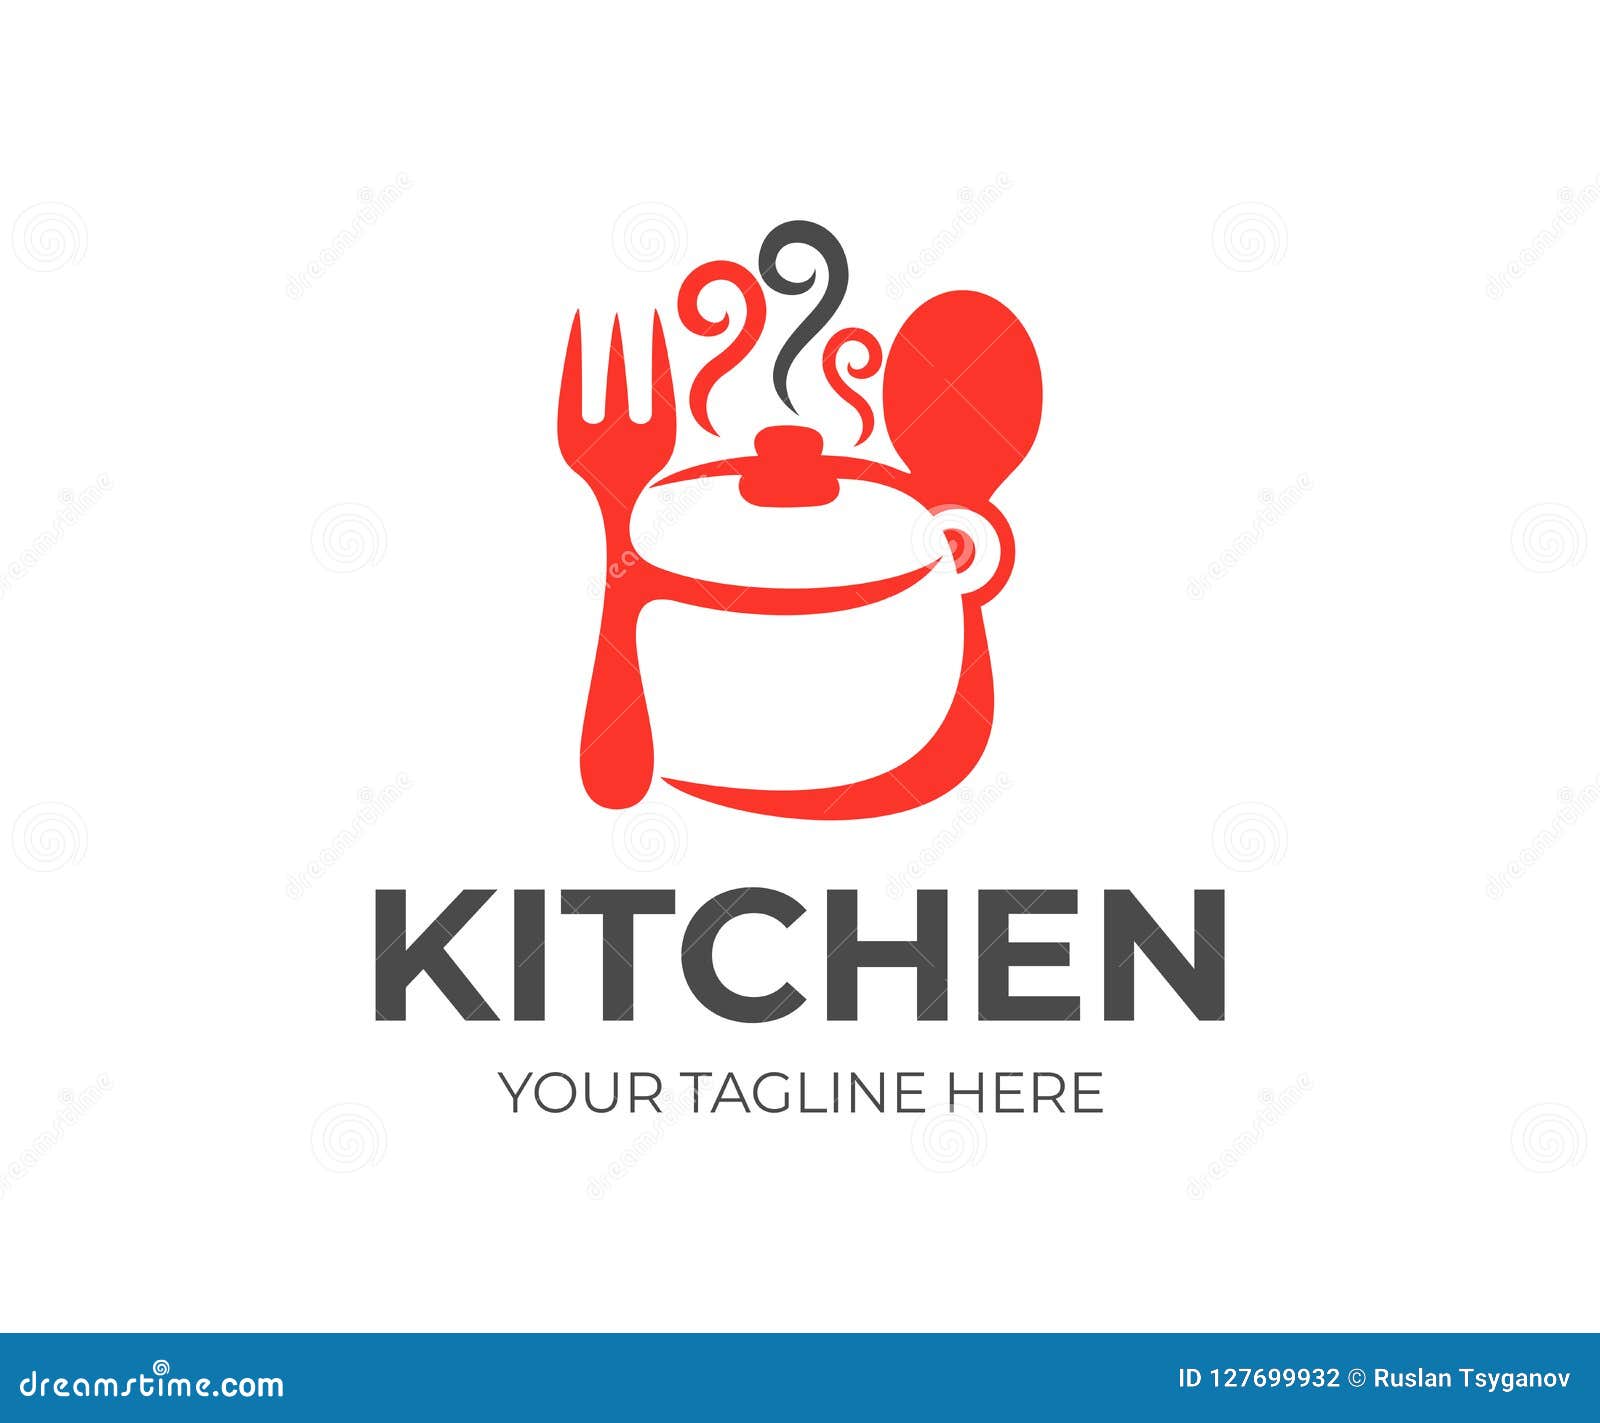 Kitchen Kitchenware Saucepan Fork And Spoon Logo Design Cooking Eat Food And Restaurant Vector Design Stock Vector Illustration Of Luncheon Cafe 127699932